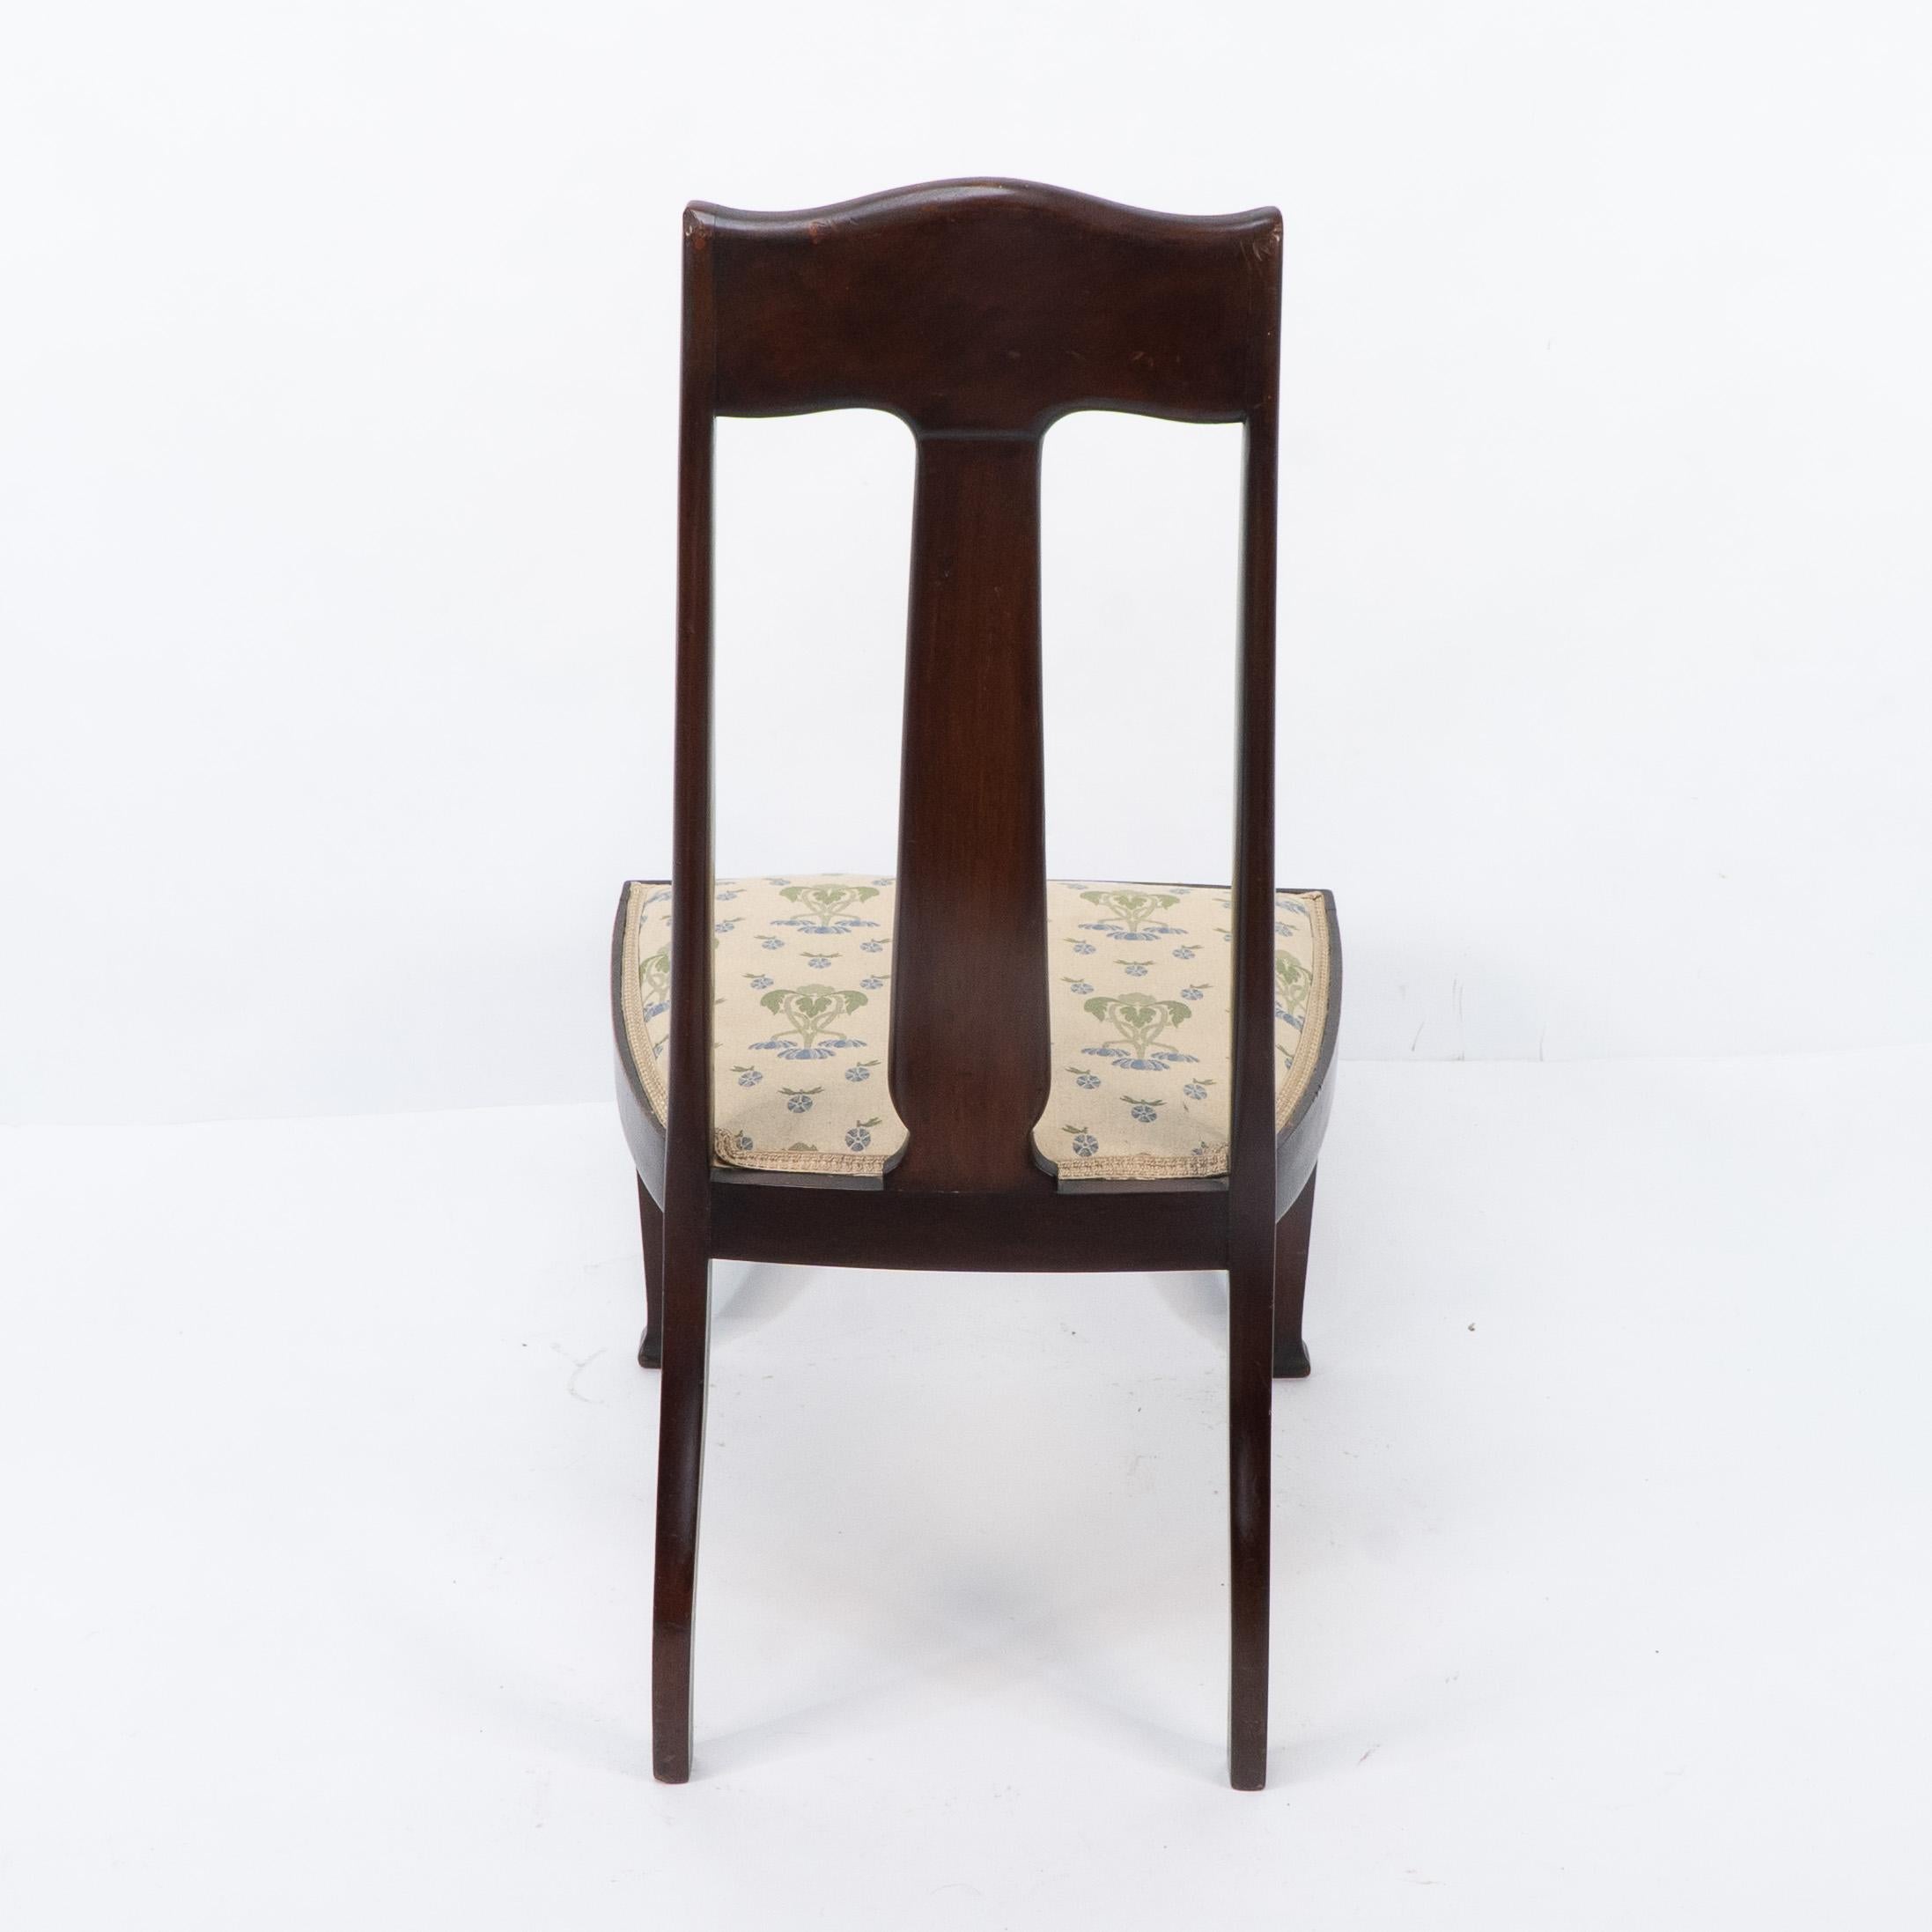 Jas Shoolbred. Arts & Crafts Mahogany Rosewood Chair With stylized Floral Inlay For Sale 5